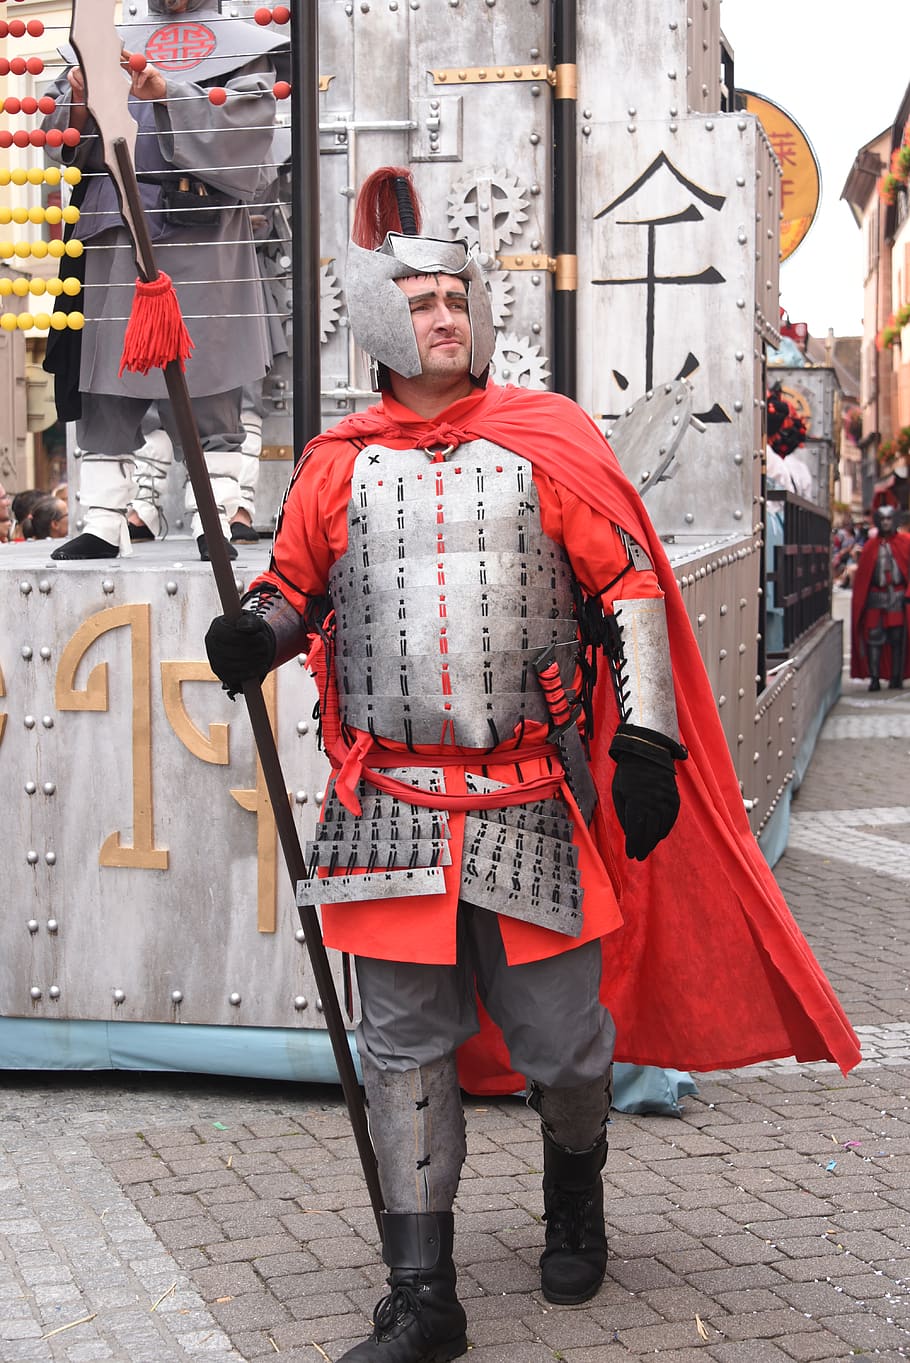 knight, lance, armor, cape, red, armed, metal, medieval, warrior, real people